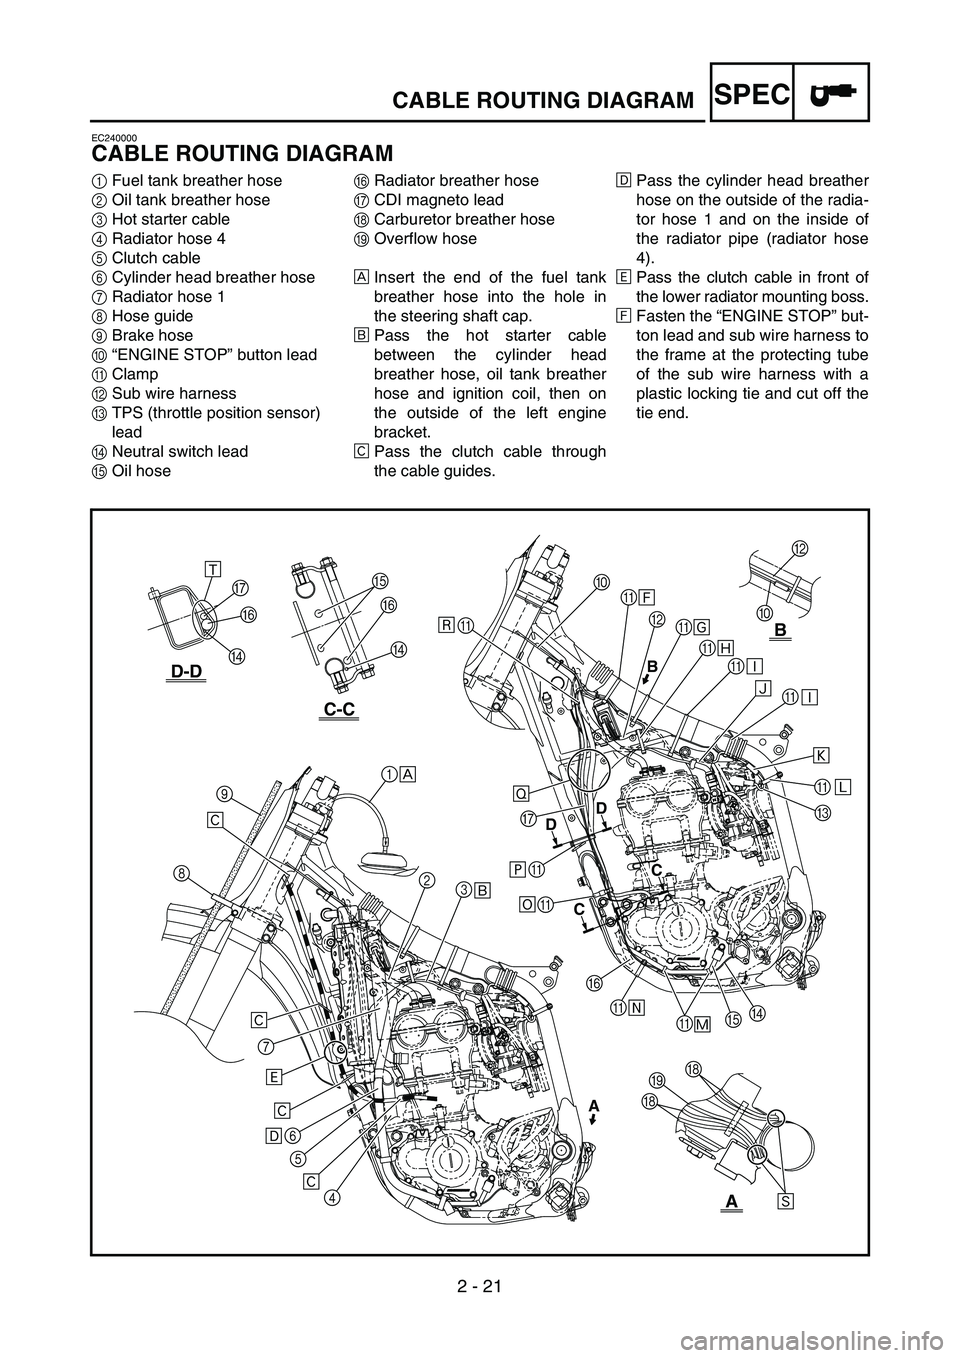 YAMAHA YZ450F 2005  Owners Manual 2 - 21
SPECCABLE ROUTING DIAGRAM
EC240000
CABLE ROUTING DIAGRAM
1Fuel tank breather hose
2Oil tank breather hose
3Hot starter cable
4Radiator hose 4
5Clutch cable
6Cylinder head breather hose
7Radiato